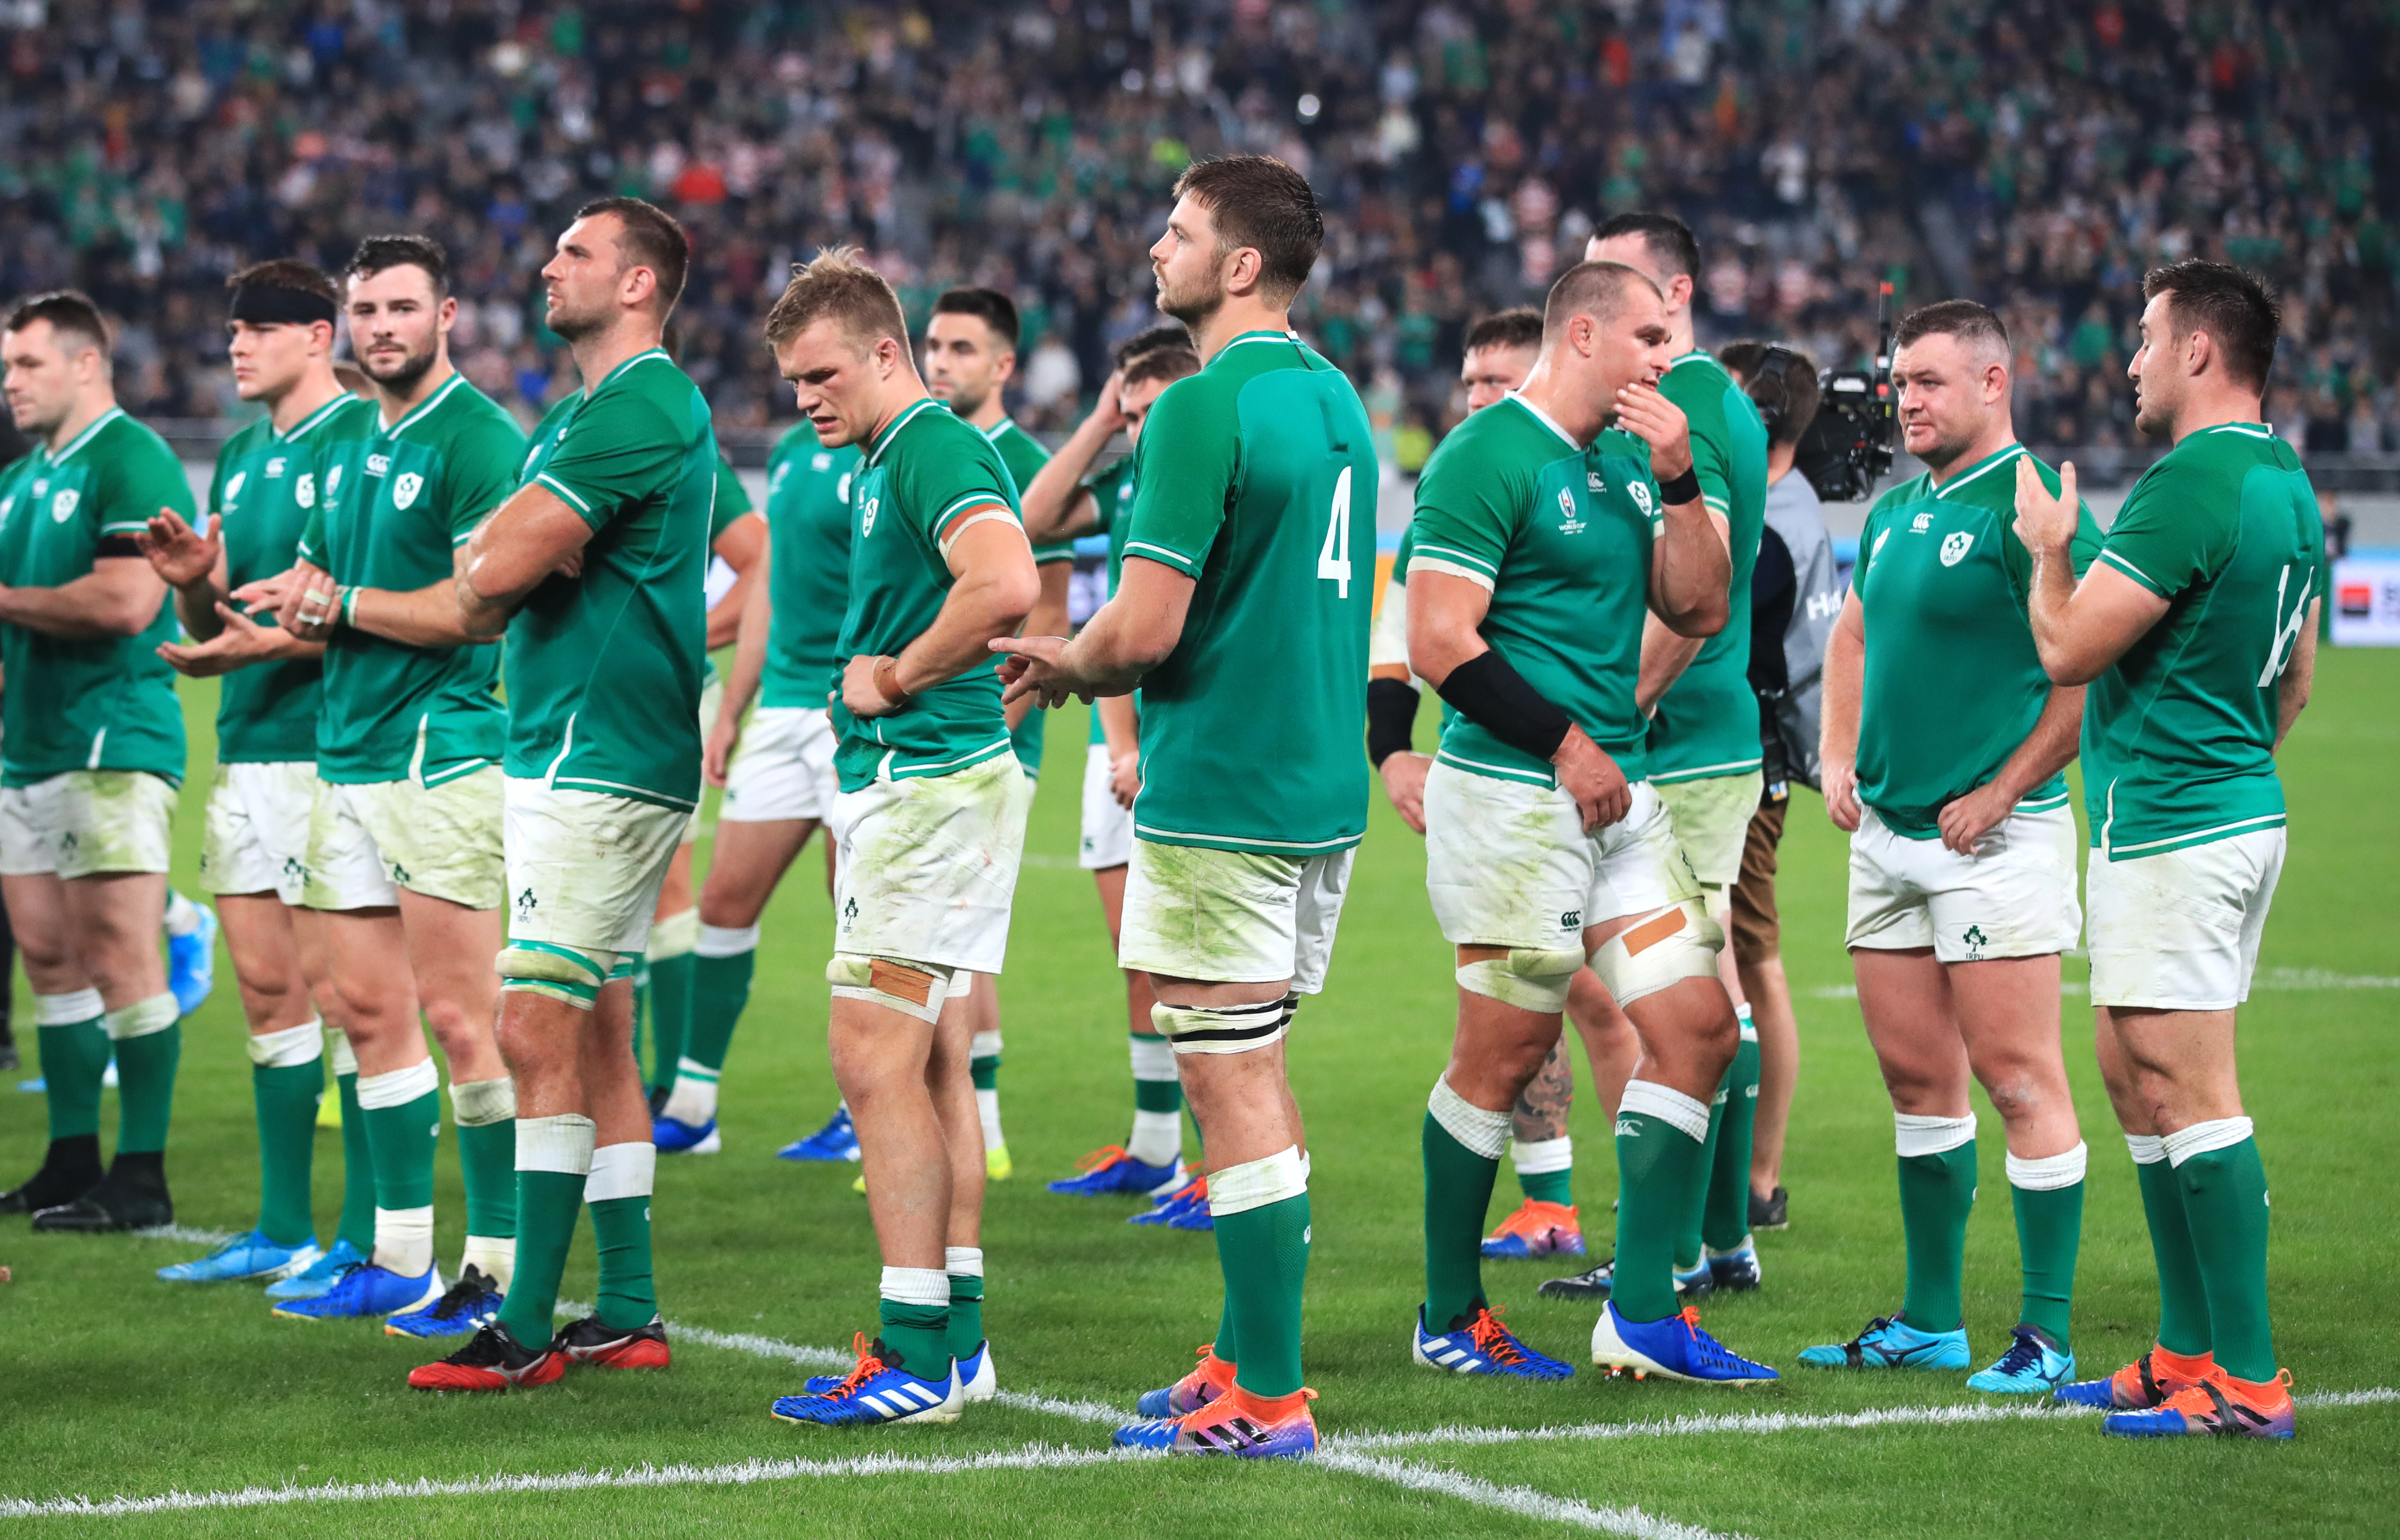 Ireland suffered a familiar quarter-final exit at the 2019 World Cup following an emphatic loss to New Zealand